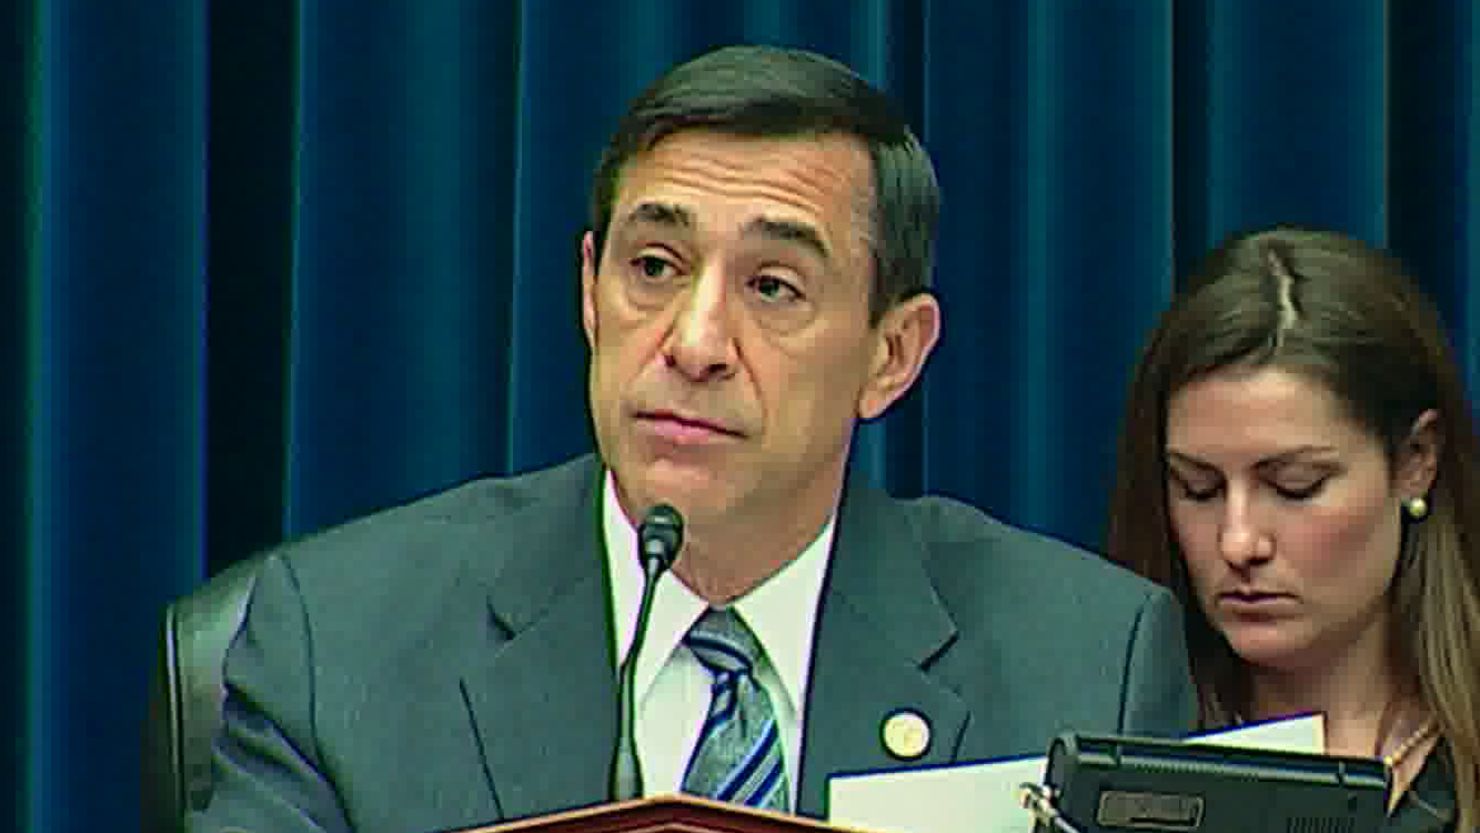 "Together, we can make Washington take a break from messing w/ the Internet," Rep. Darrell Issa said on Reddit.